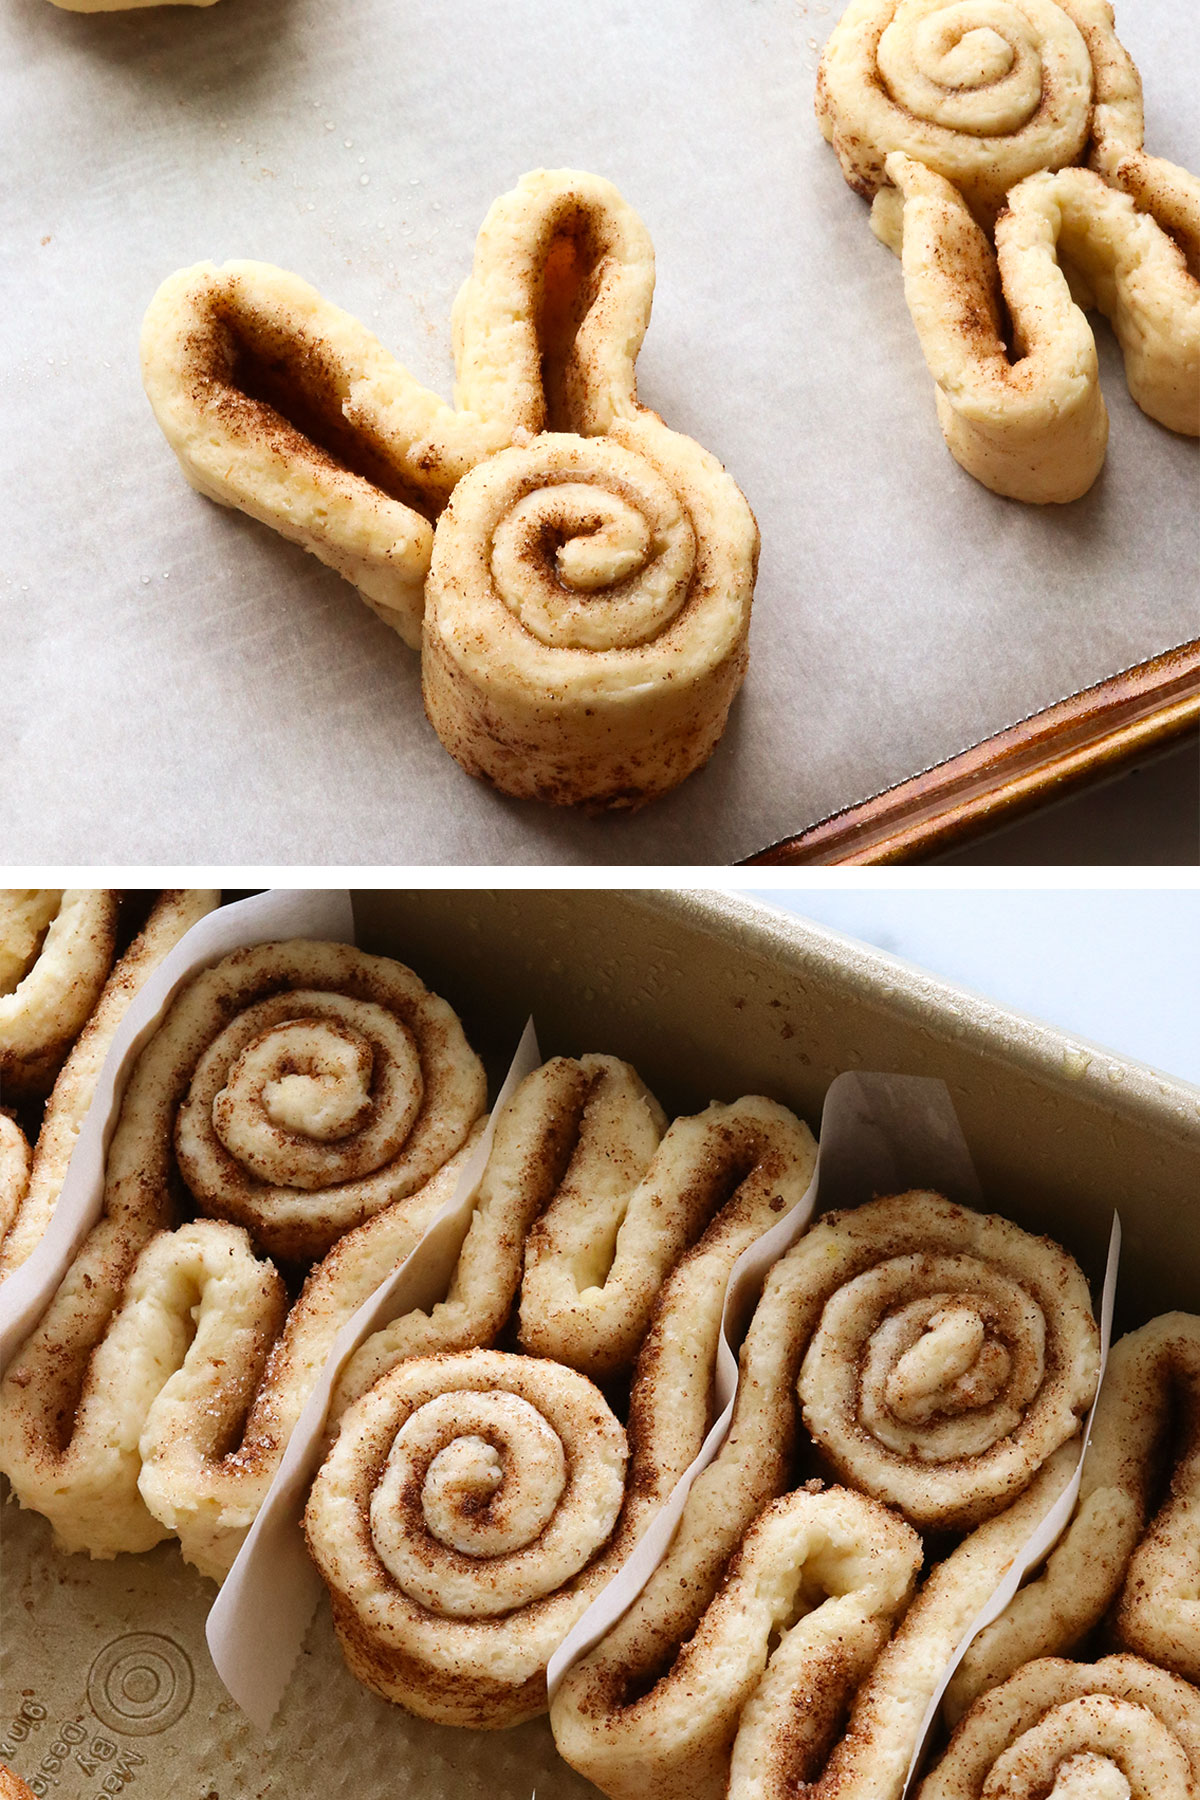 bunny cinnamon rolls shaped and arranged in the pan.